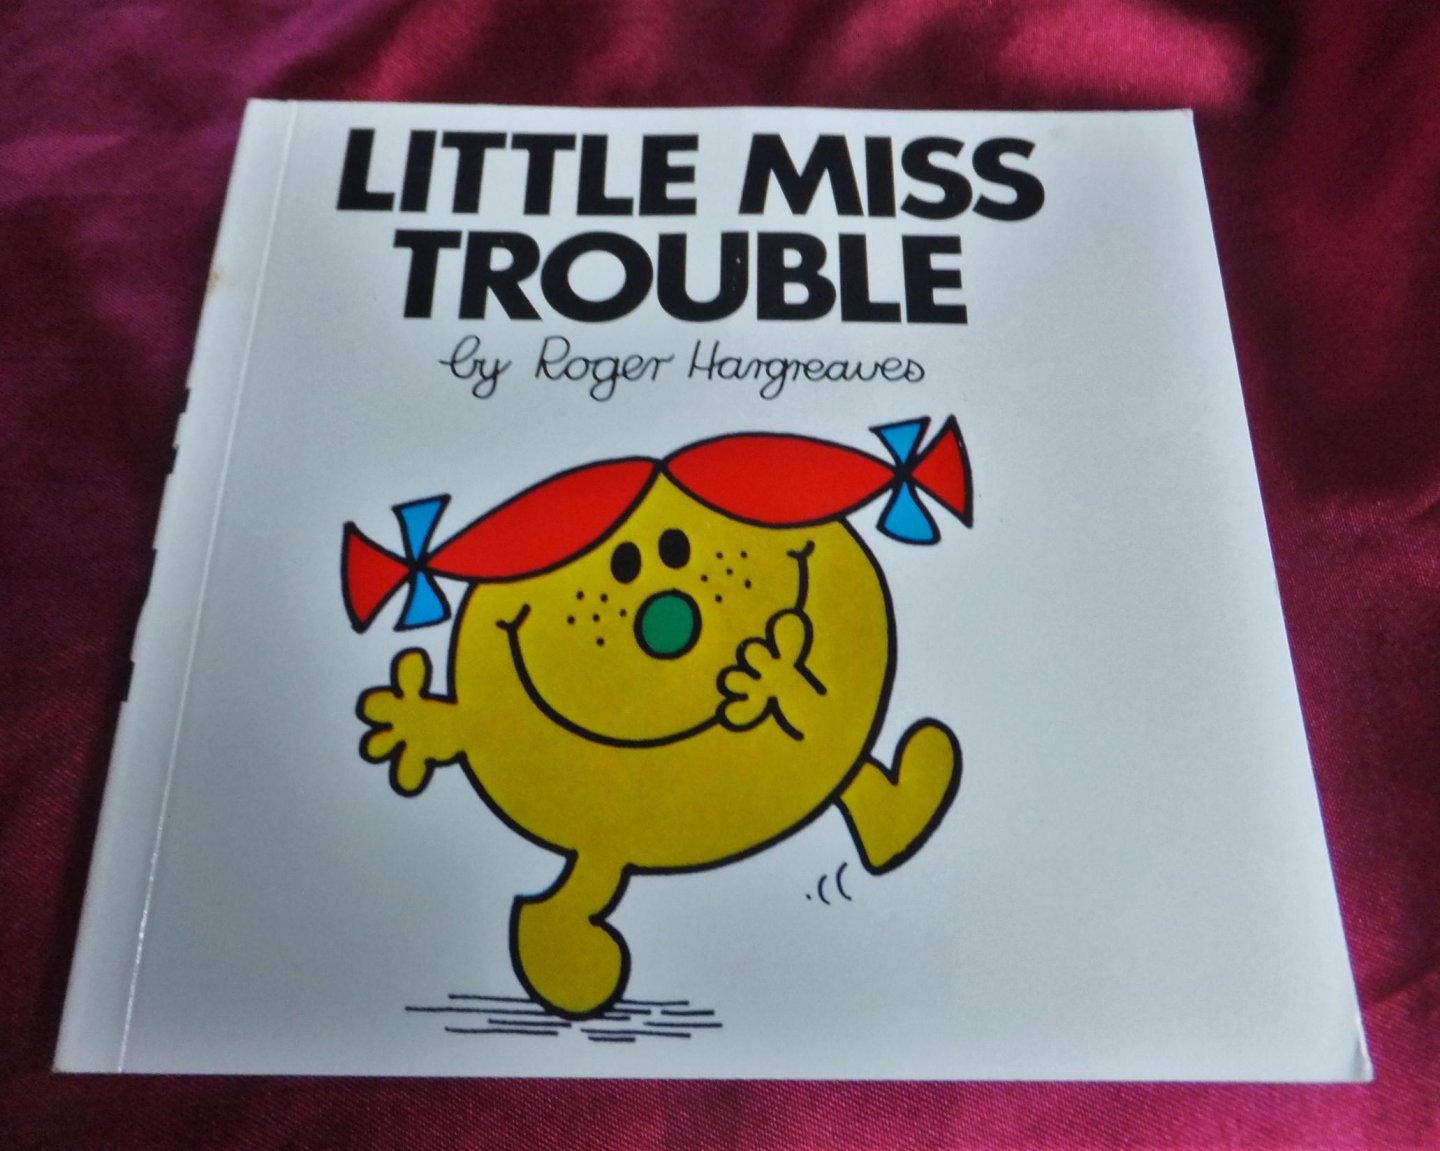 Hargreaves, Roger - 6. Little Miss Trouble